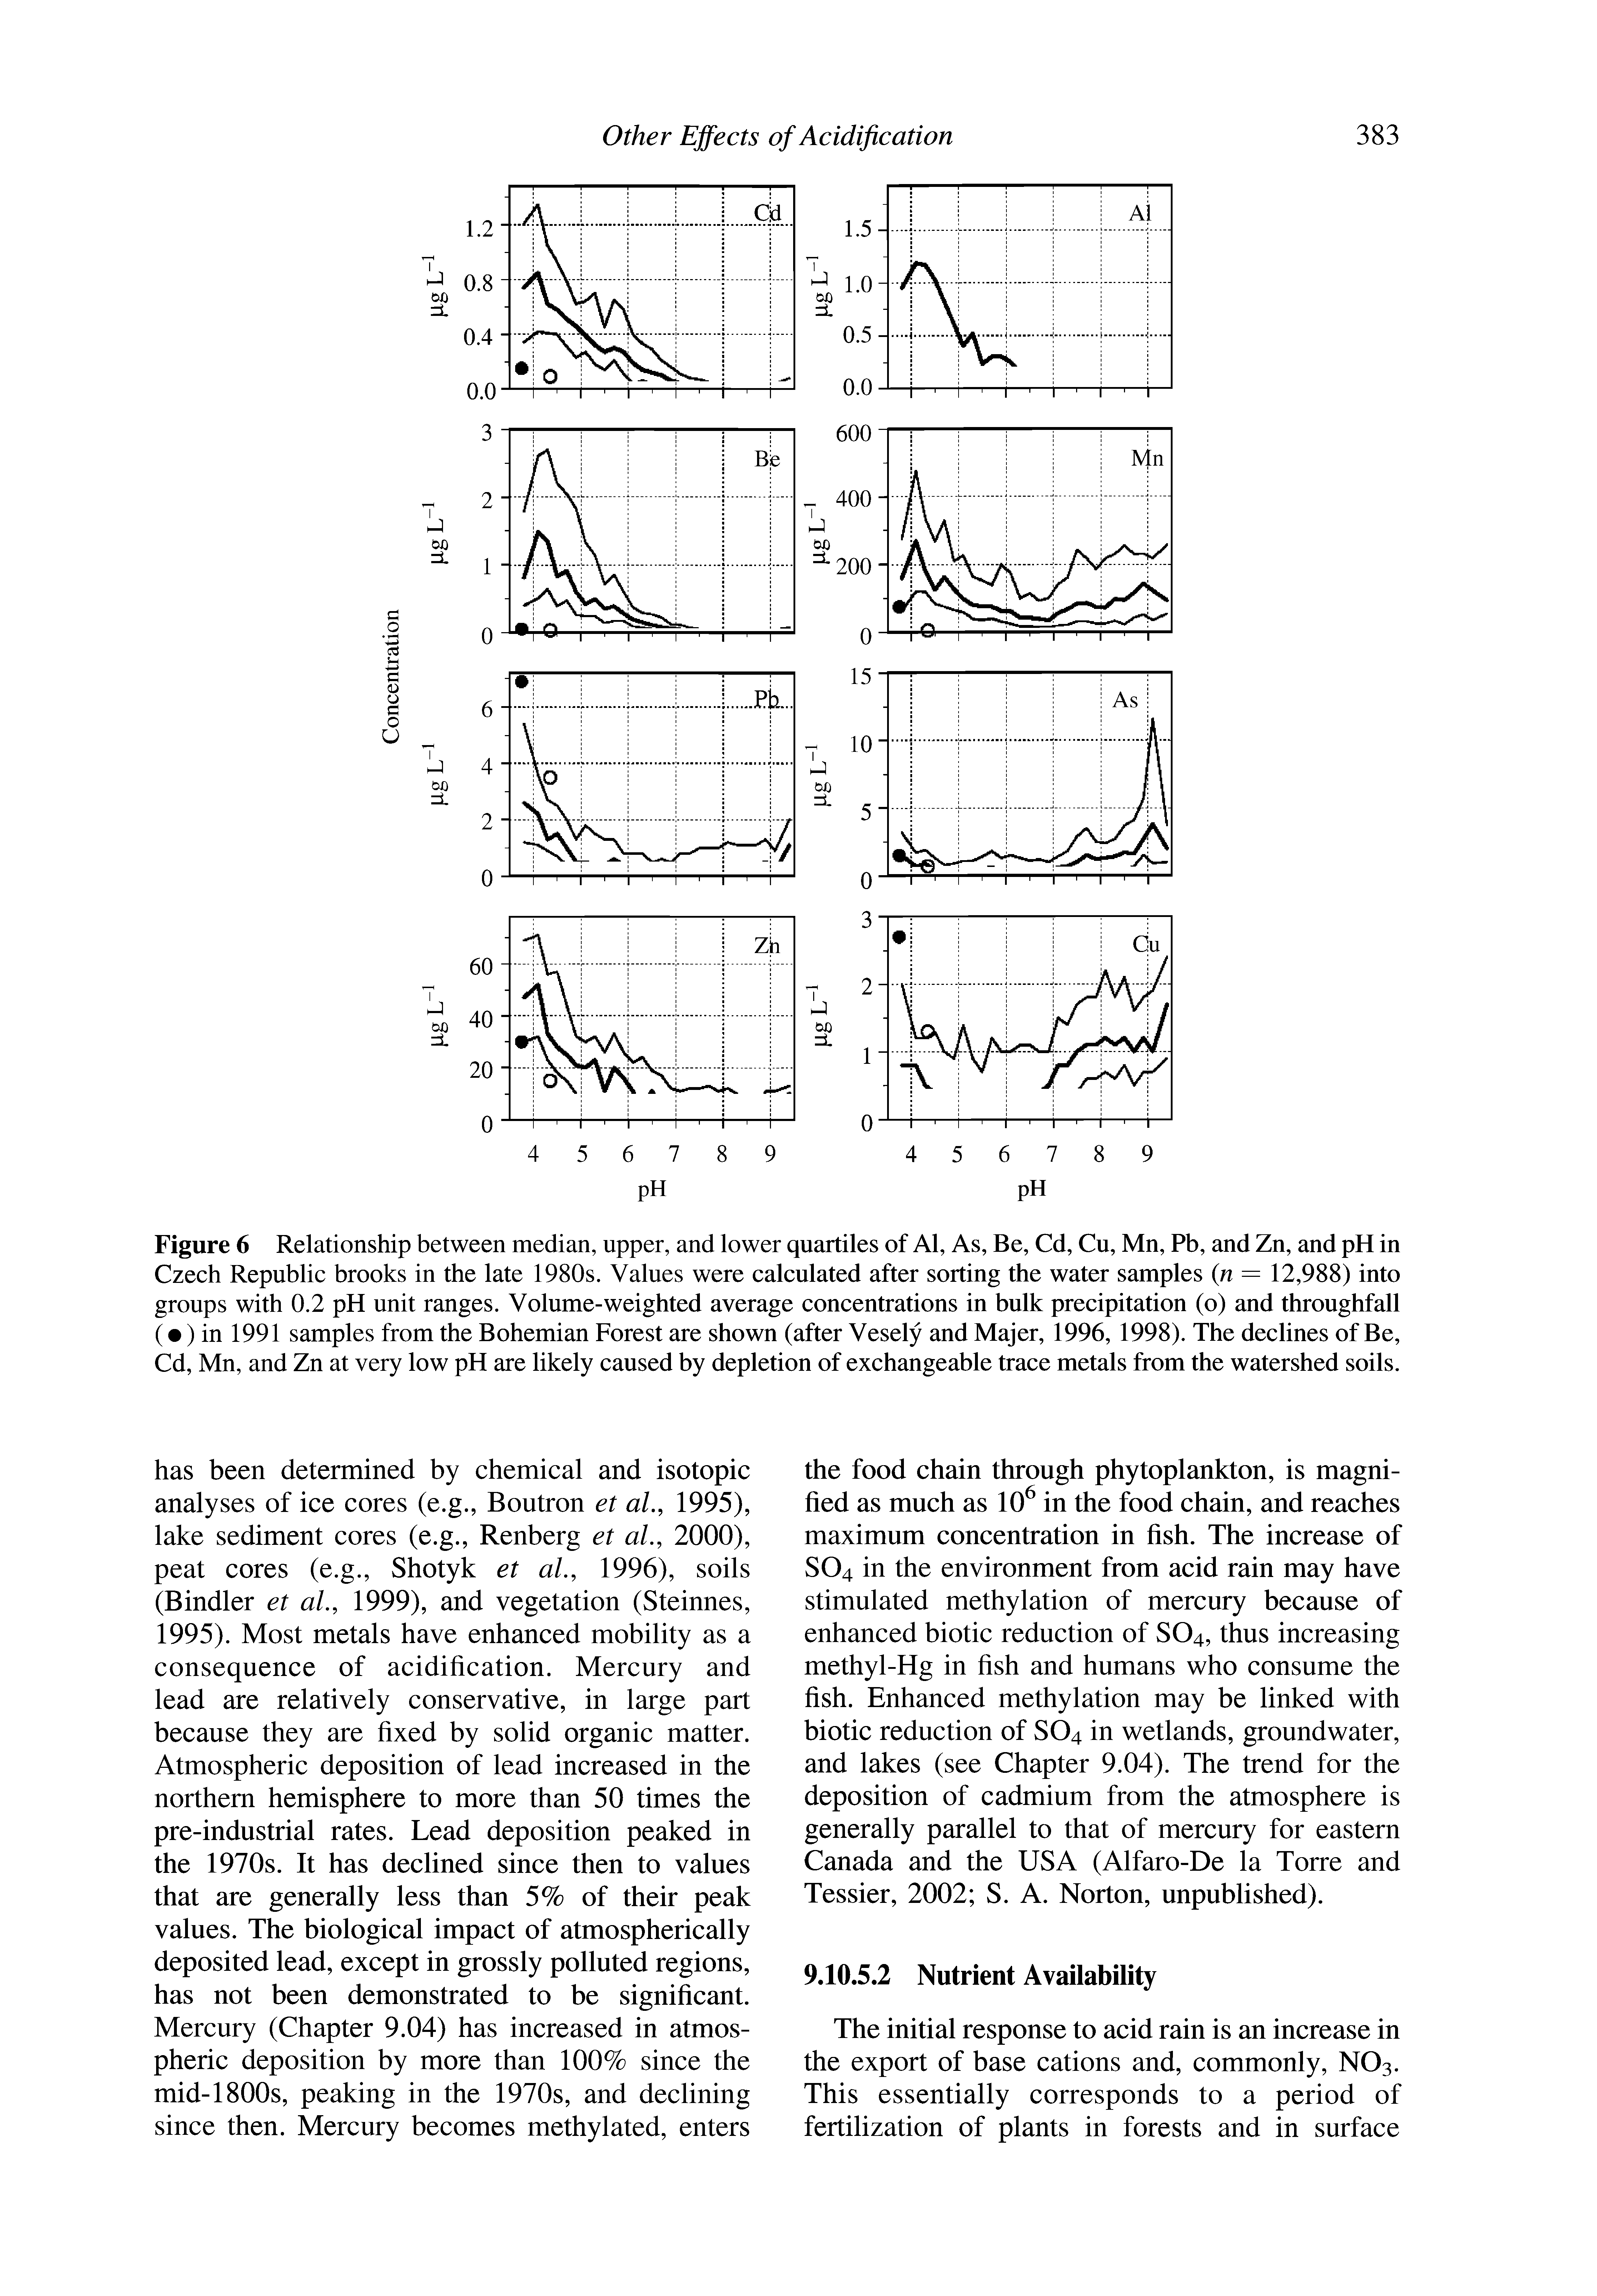 Figure 6 Relationship between median, upper, and lower quartiles of Al, As, Be, Cd, Cu, Mn, Pb, and Zn, and pH in Czech Republic brooks in the late 1980s. Values were calculated after sorting the water samples n = 12,988) into groups with 0.2 pH unit ranges. Volume-weighted average concentrations in bulk precipitation (o) and throughfall ( ) in 1991 samples from the Bohemian Forest are shown (after Vesely and Majer, 1996, 1998). The declines of Be, Cd, Mn, and Zn at very low pH are likely caused by depletion of exchangeable trace metals from the watershed soils.